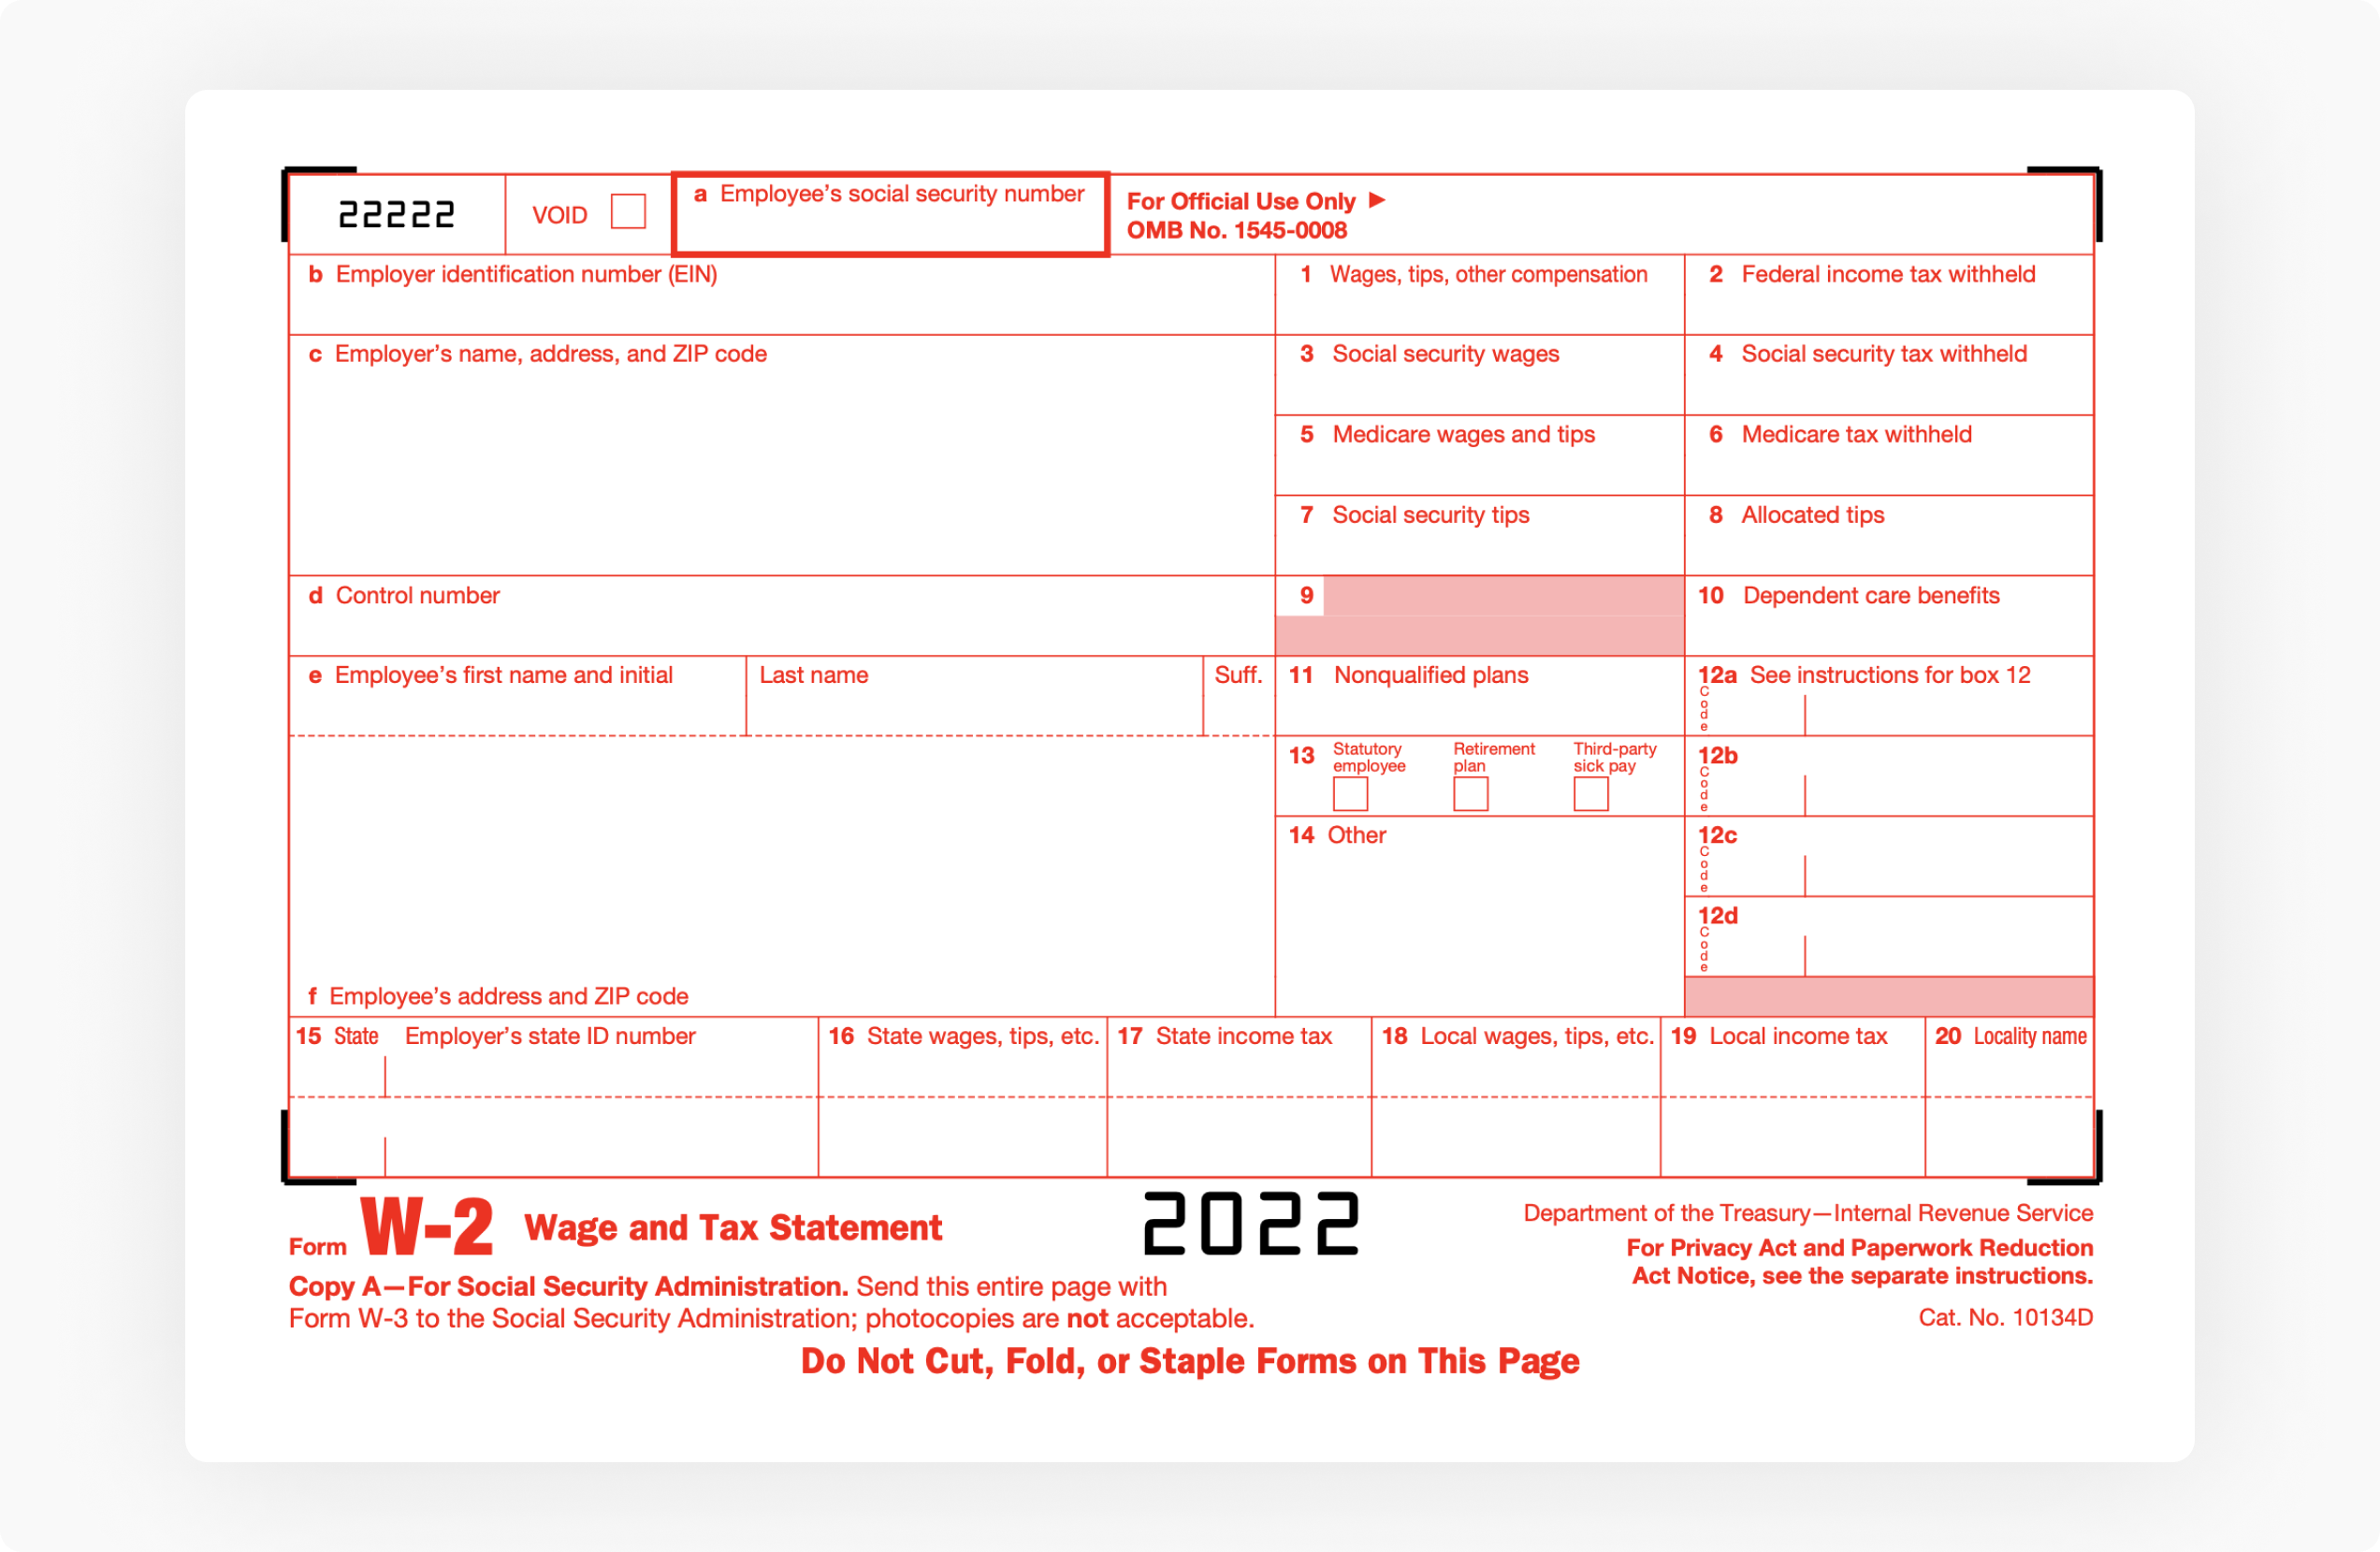 Top 10 Irs Forms List Us Taxpayers Need To Know About - Pdffiller Blog pertaining to Lost W2 Form 2022